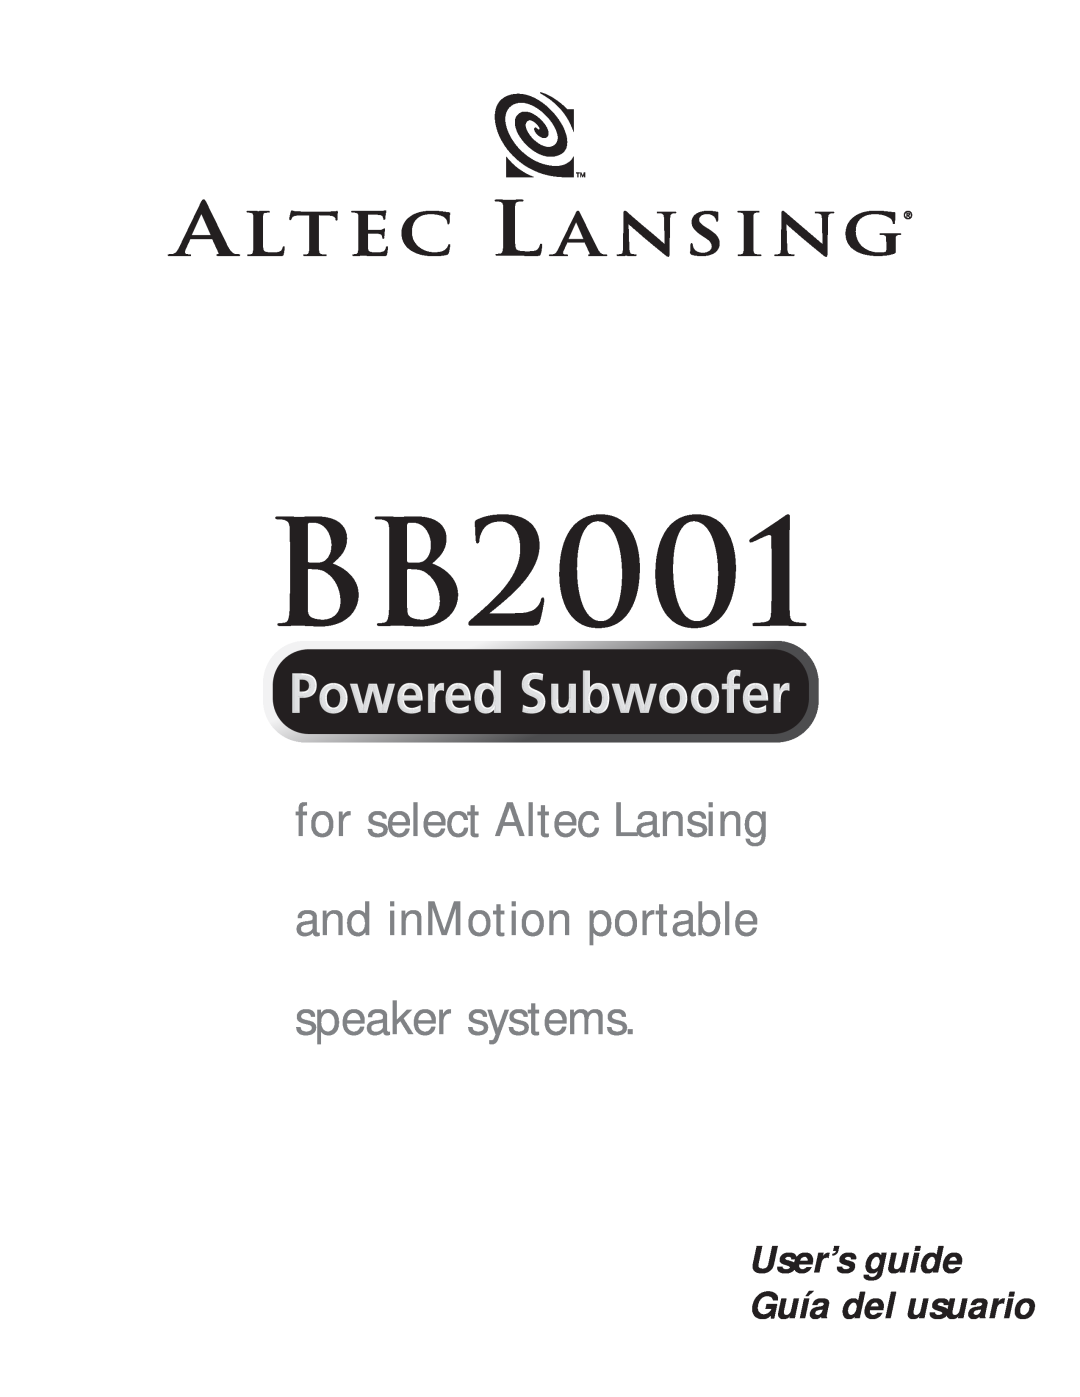 Altec Lansing BB2001 manual for select Altec Lansing and inMotion portable, speaker systems, User’s guide Guía del usuario 